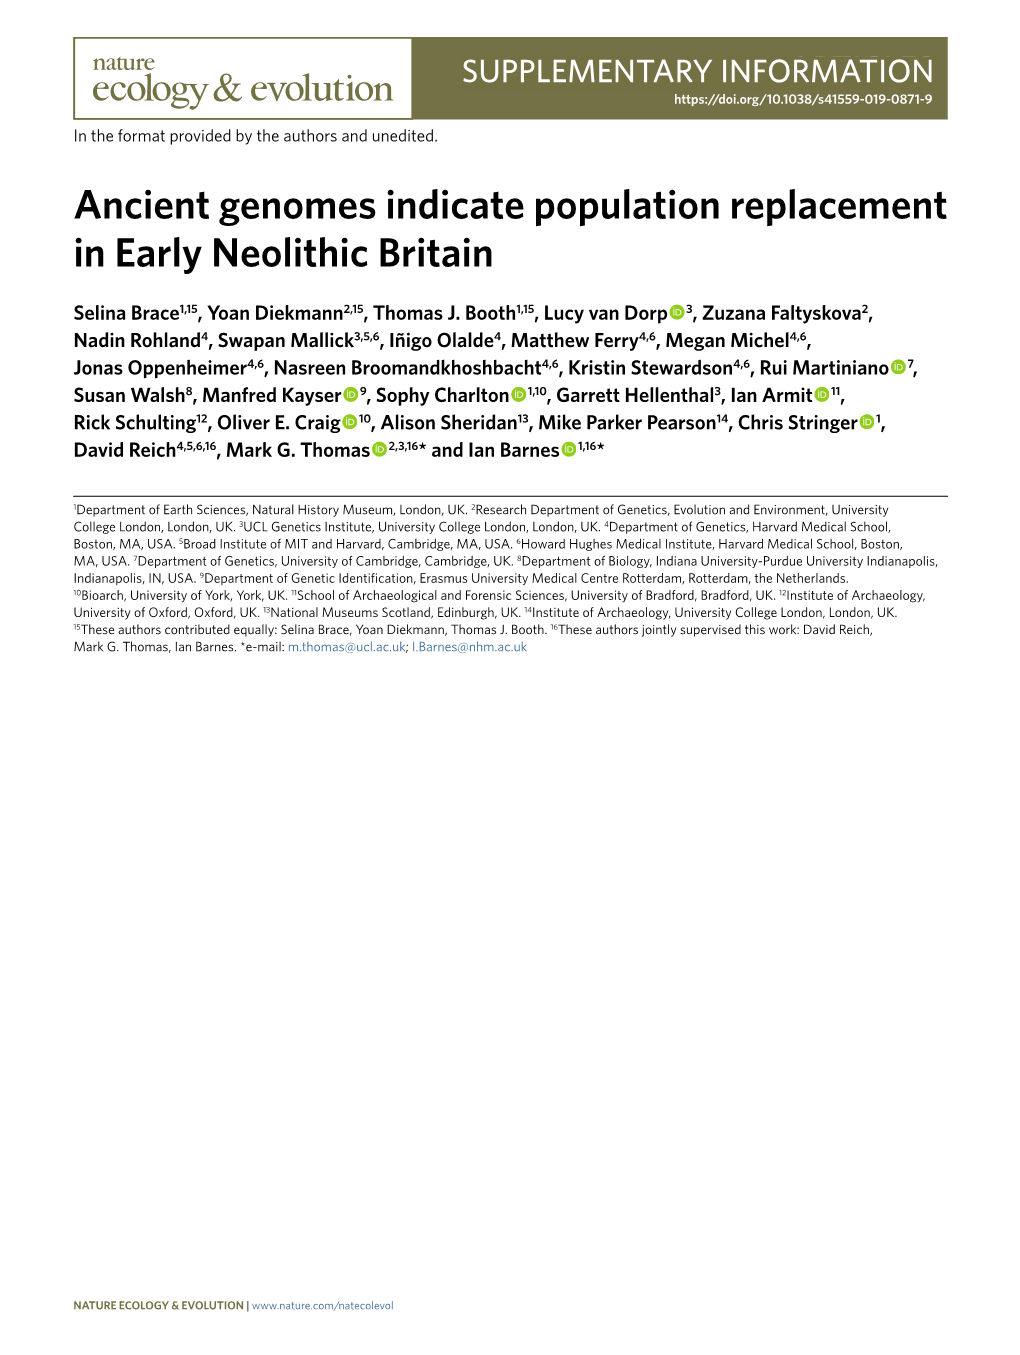 Ancient Genomes Indicate Population Replacement in Early Neolithic Britain